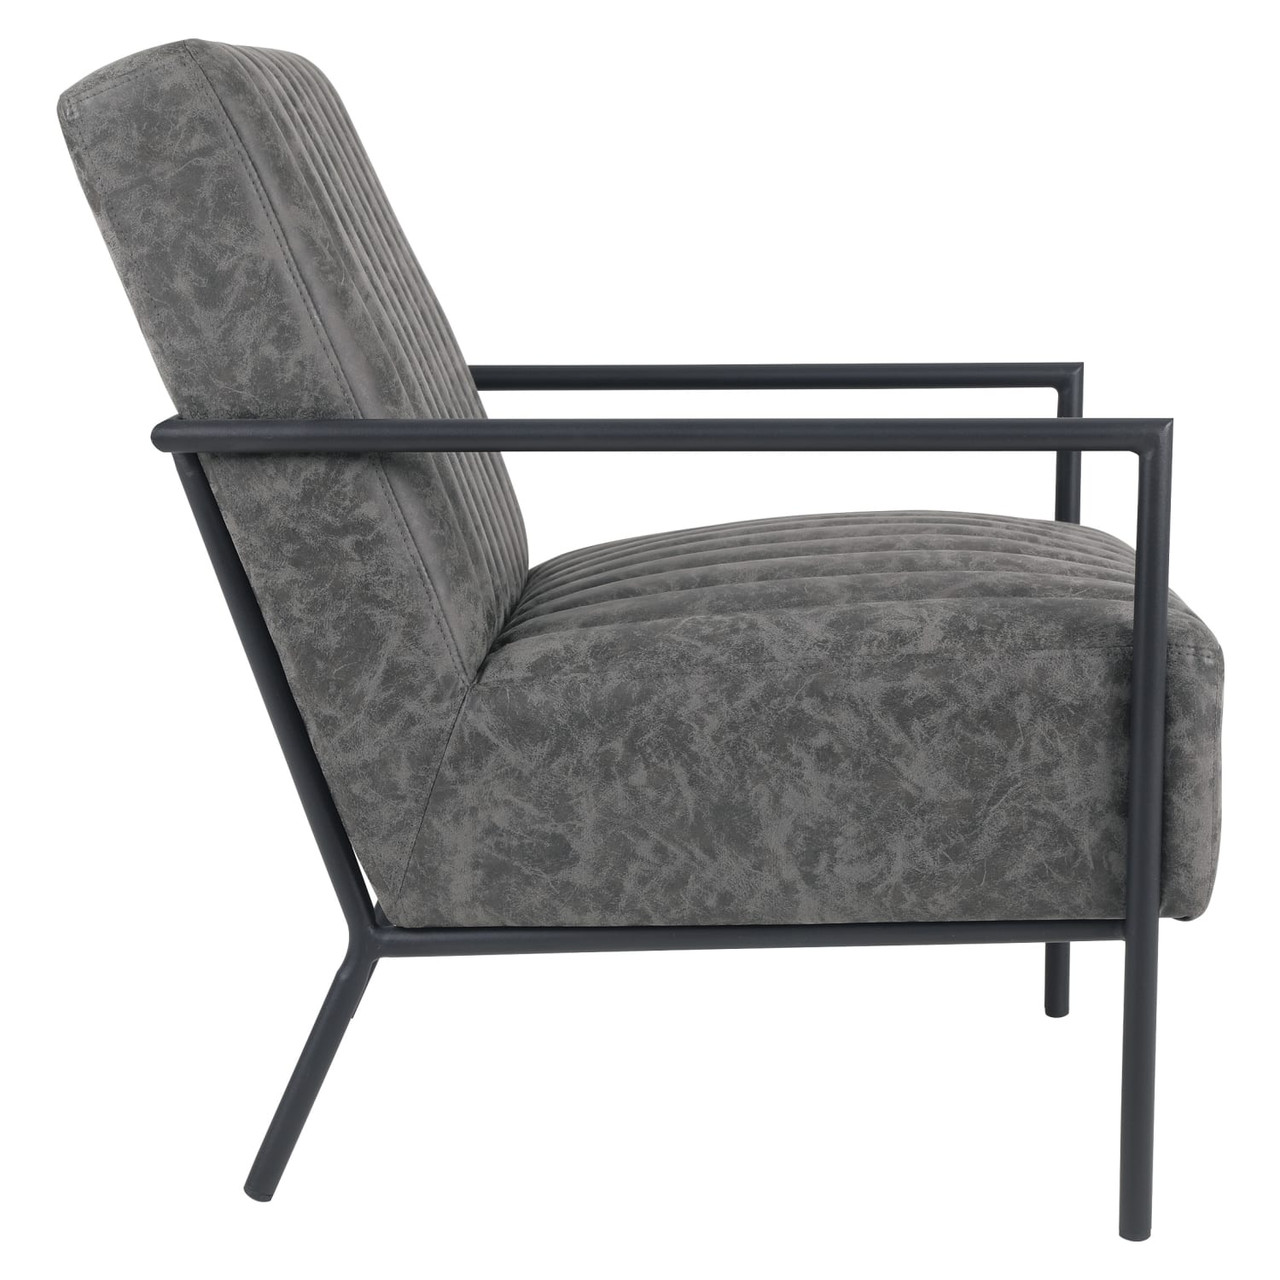 Verdugo Accent Chair with Black Frame in Charcoal Faux Leather